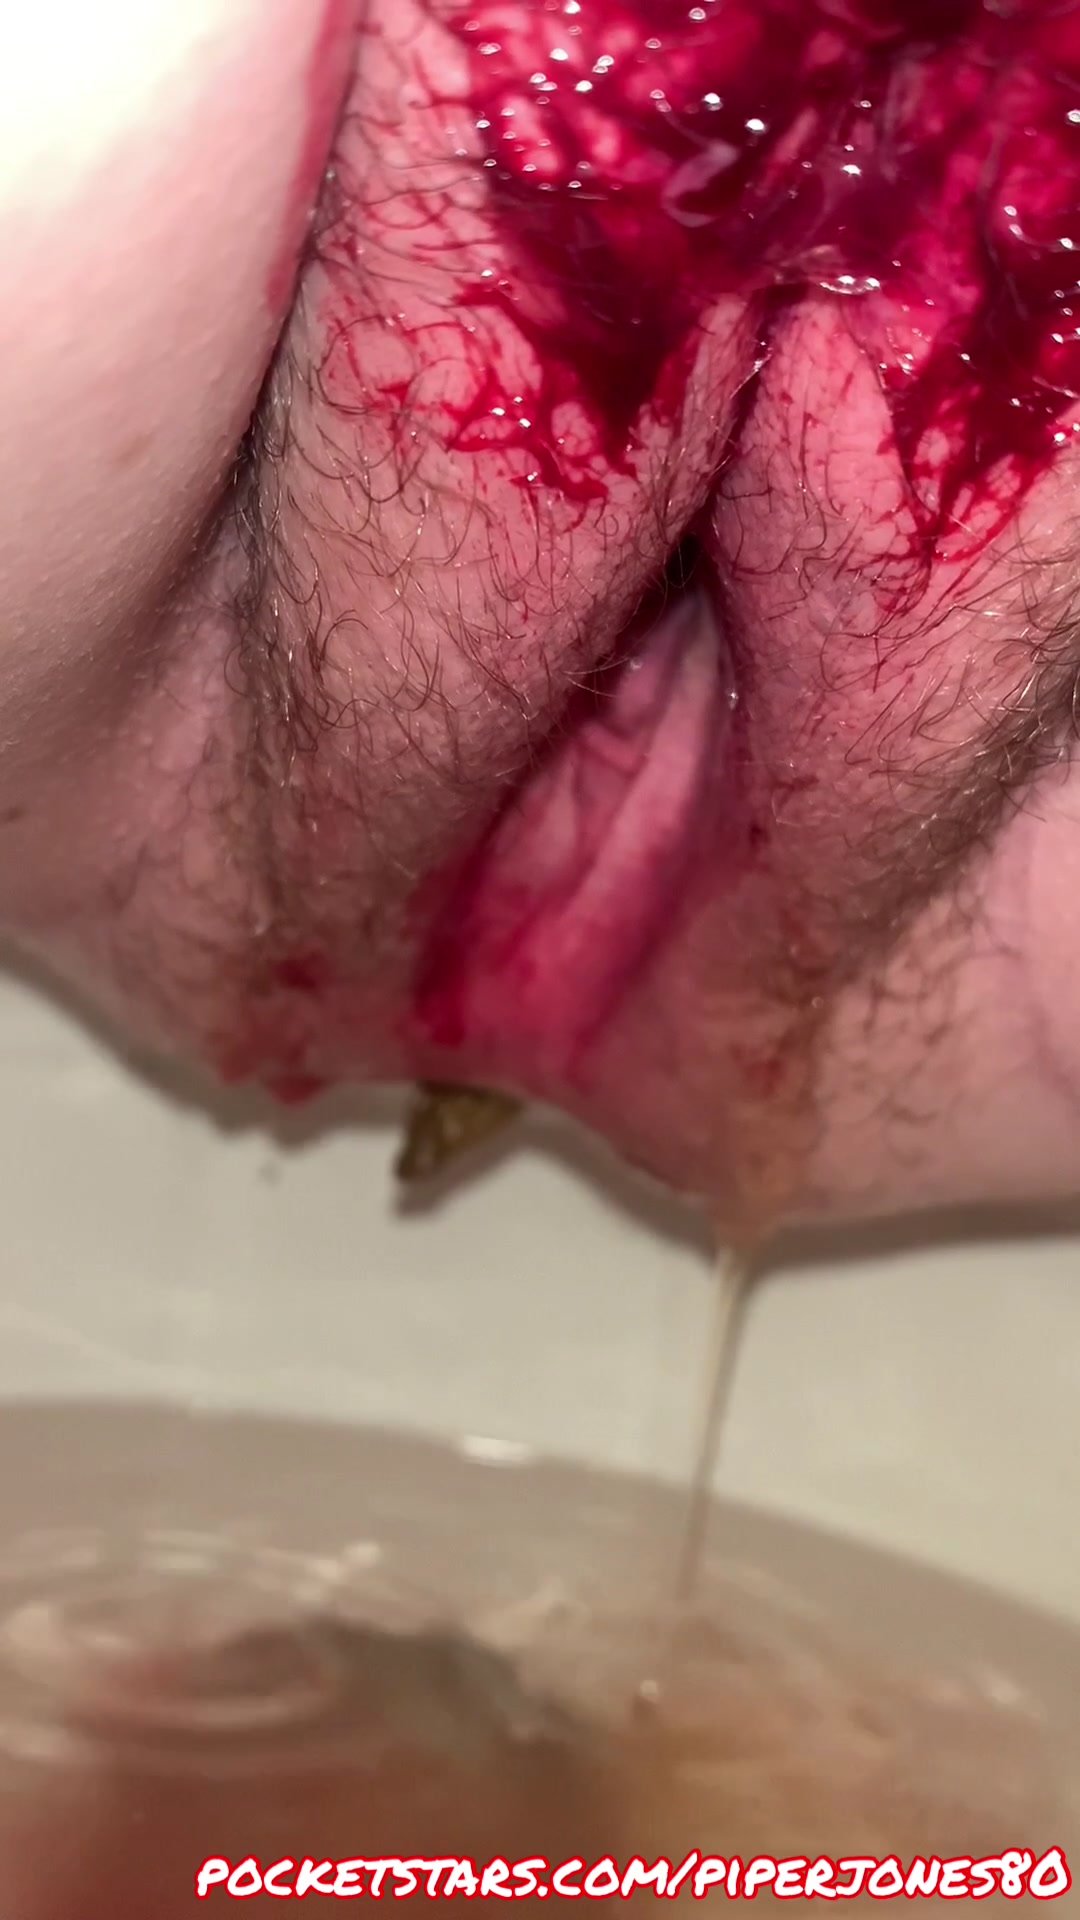 Shitting While On Period